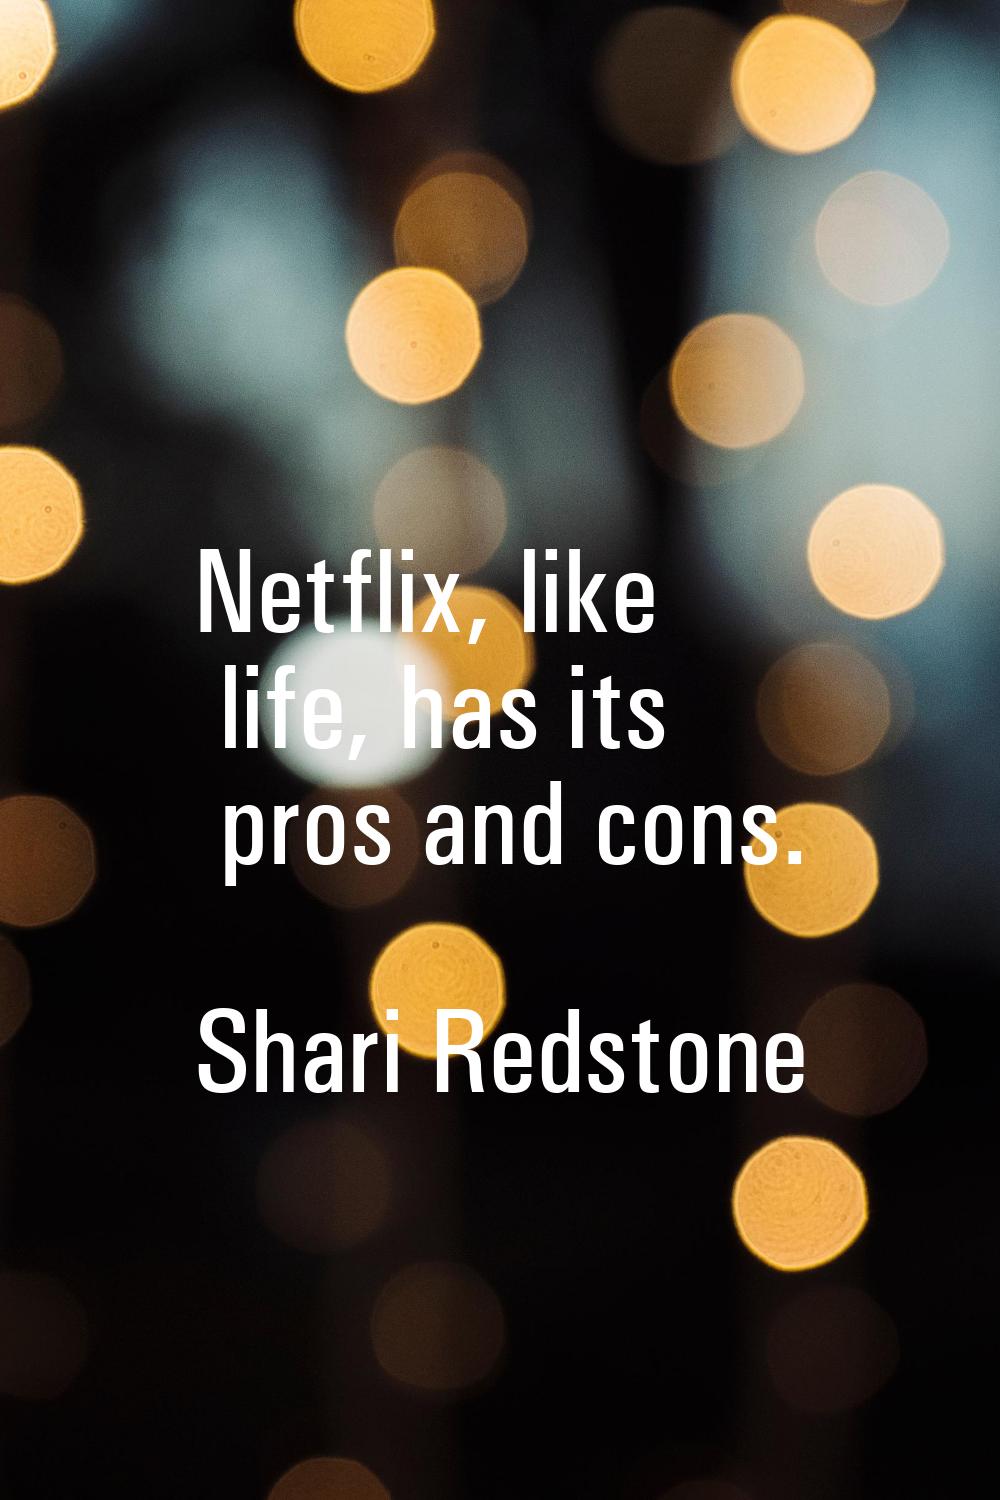 Netflix, like life, has its pros and cons.